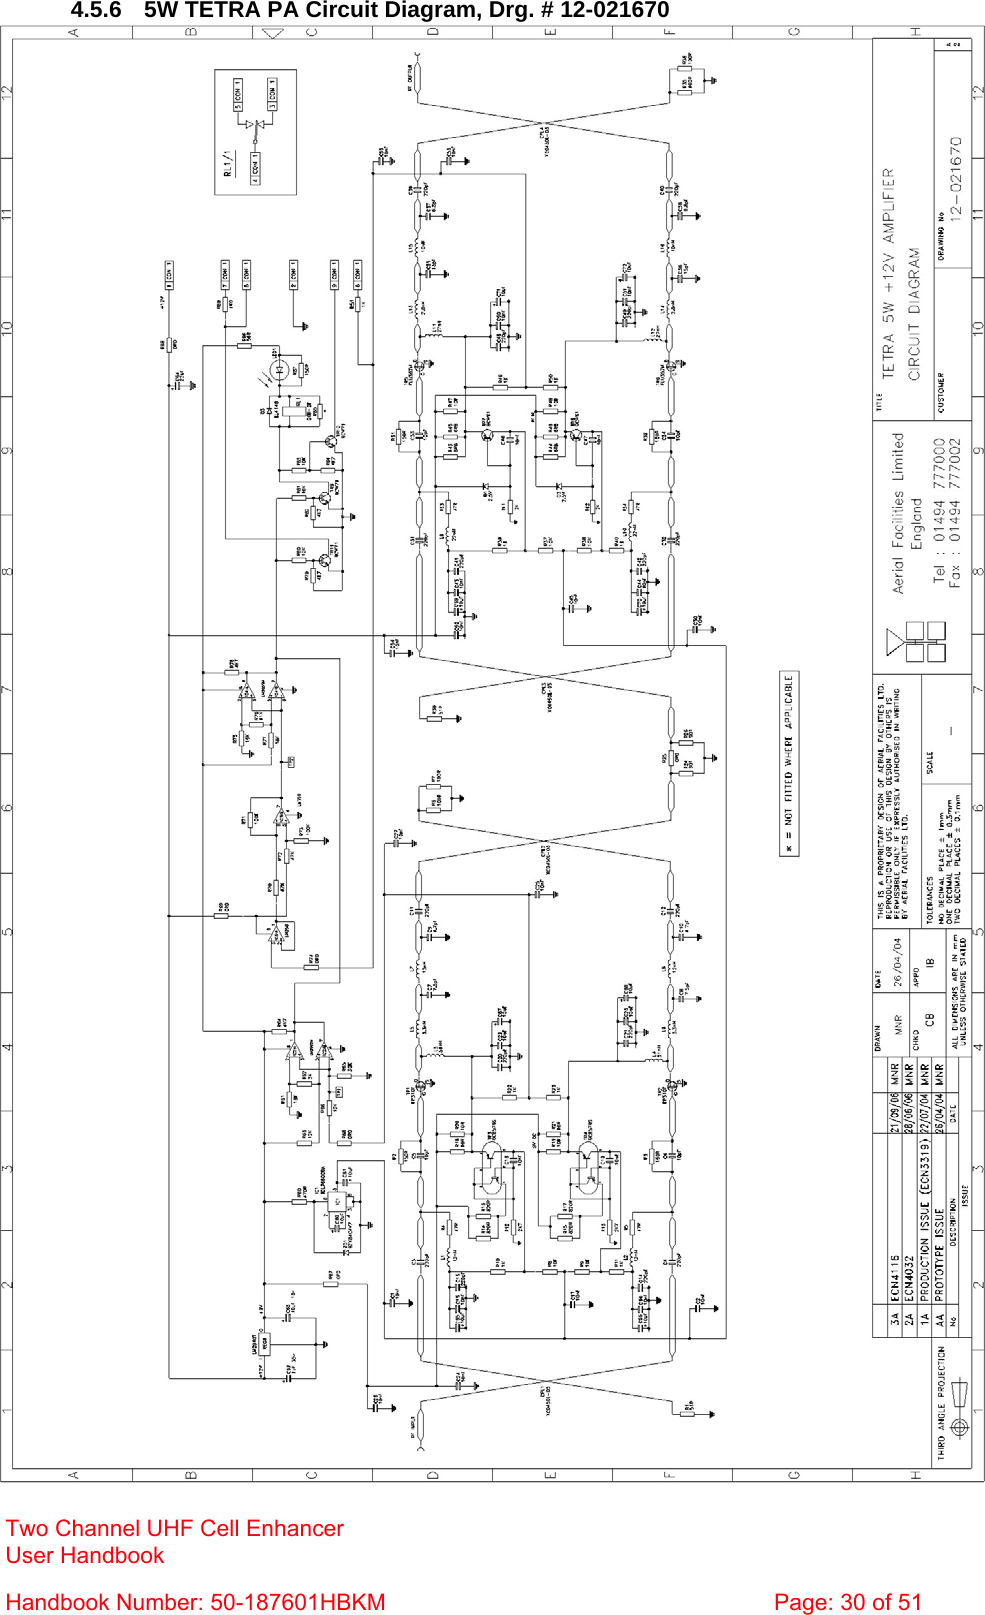  4.5.6  5W TETRA PA Circuit Diagram, Drg. # 12-021670  Two Channel UHF Cell Enhancer User Handbook Handbook Number: 50-187601HBKM  Page: 30 of 51  